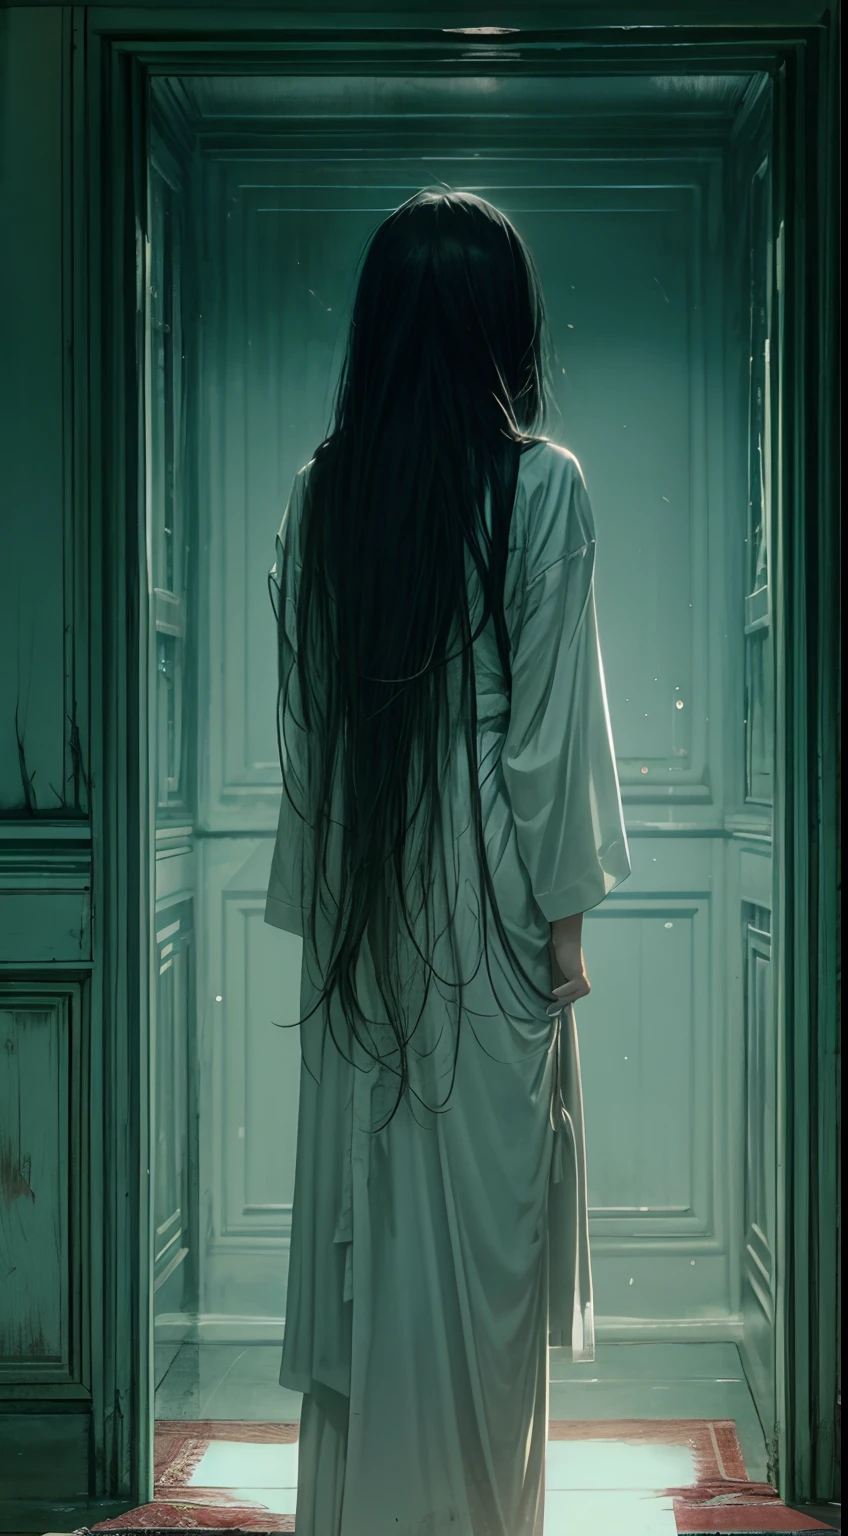 horror film shot of a creepy girl with long straight black hair, no face, wearing a dirty hospital gown,standing alone inside a haunted mansion at night, rule of the thirds, tonal color scheme, pale green, pensive stillness, bokeh, mystery, horror, unholy, eerie, creepy, moody lighting, in the style of denis villeneuve, film still, cinestill 800